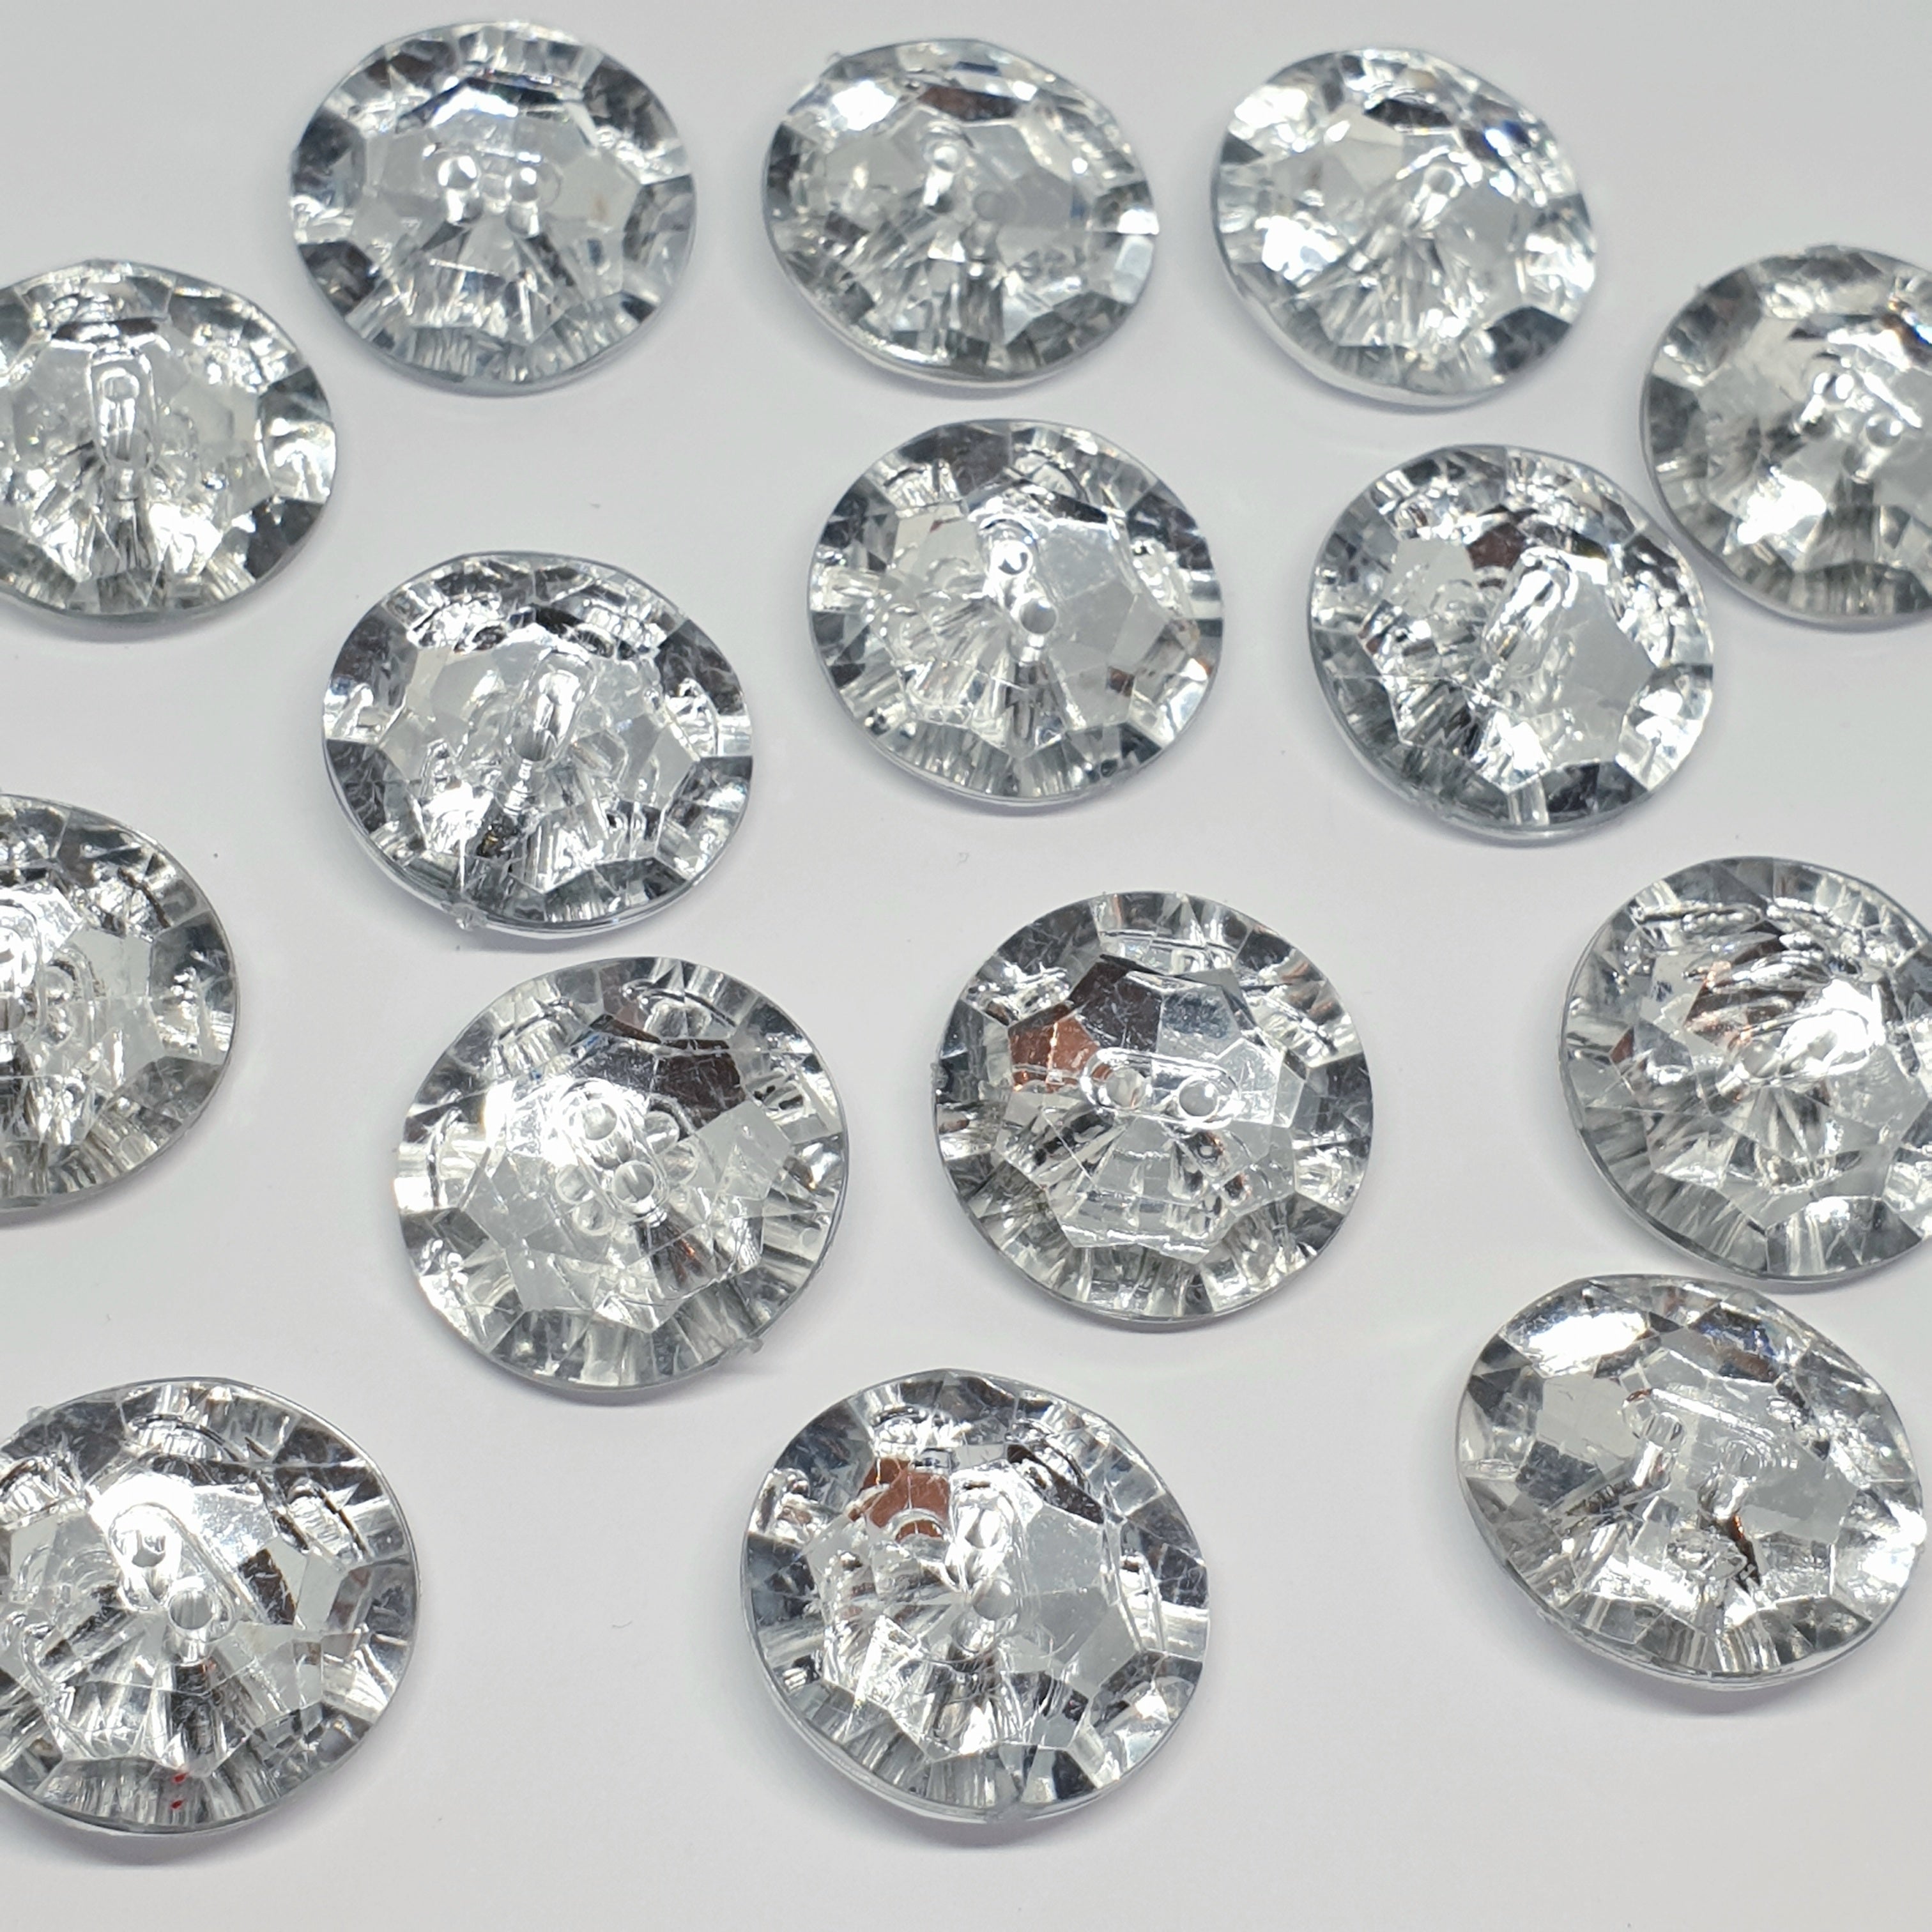 MajorCrafts 12pcs 25mm Crystal Clear Faceted 2 Holes Large Round Acrylic Sewing Buttons